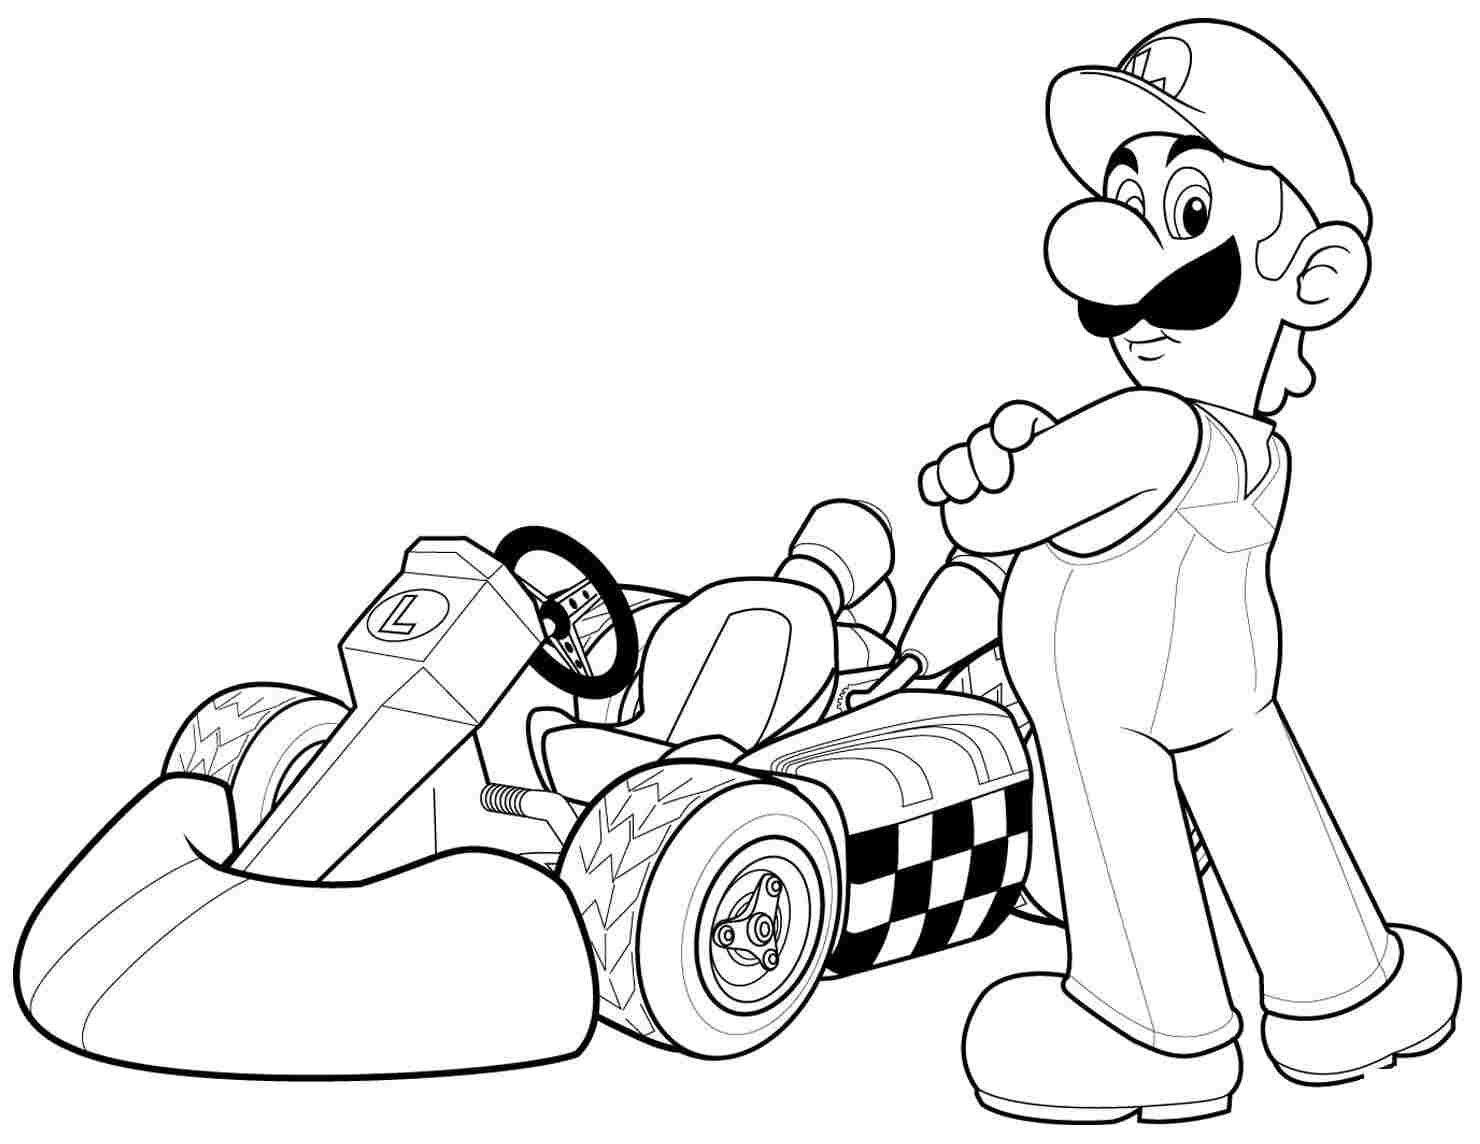 Mario kart coloring pages printable for free download